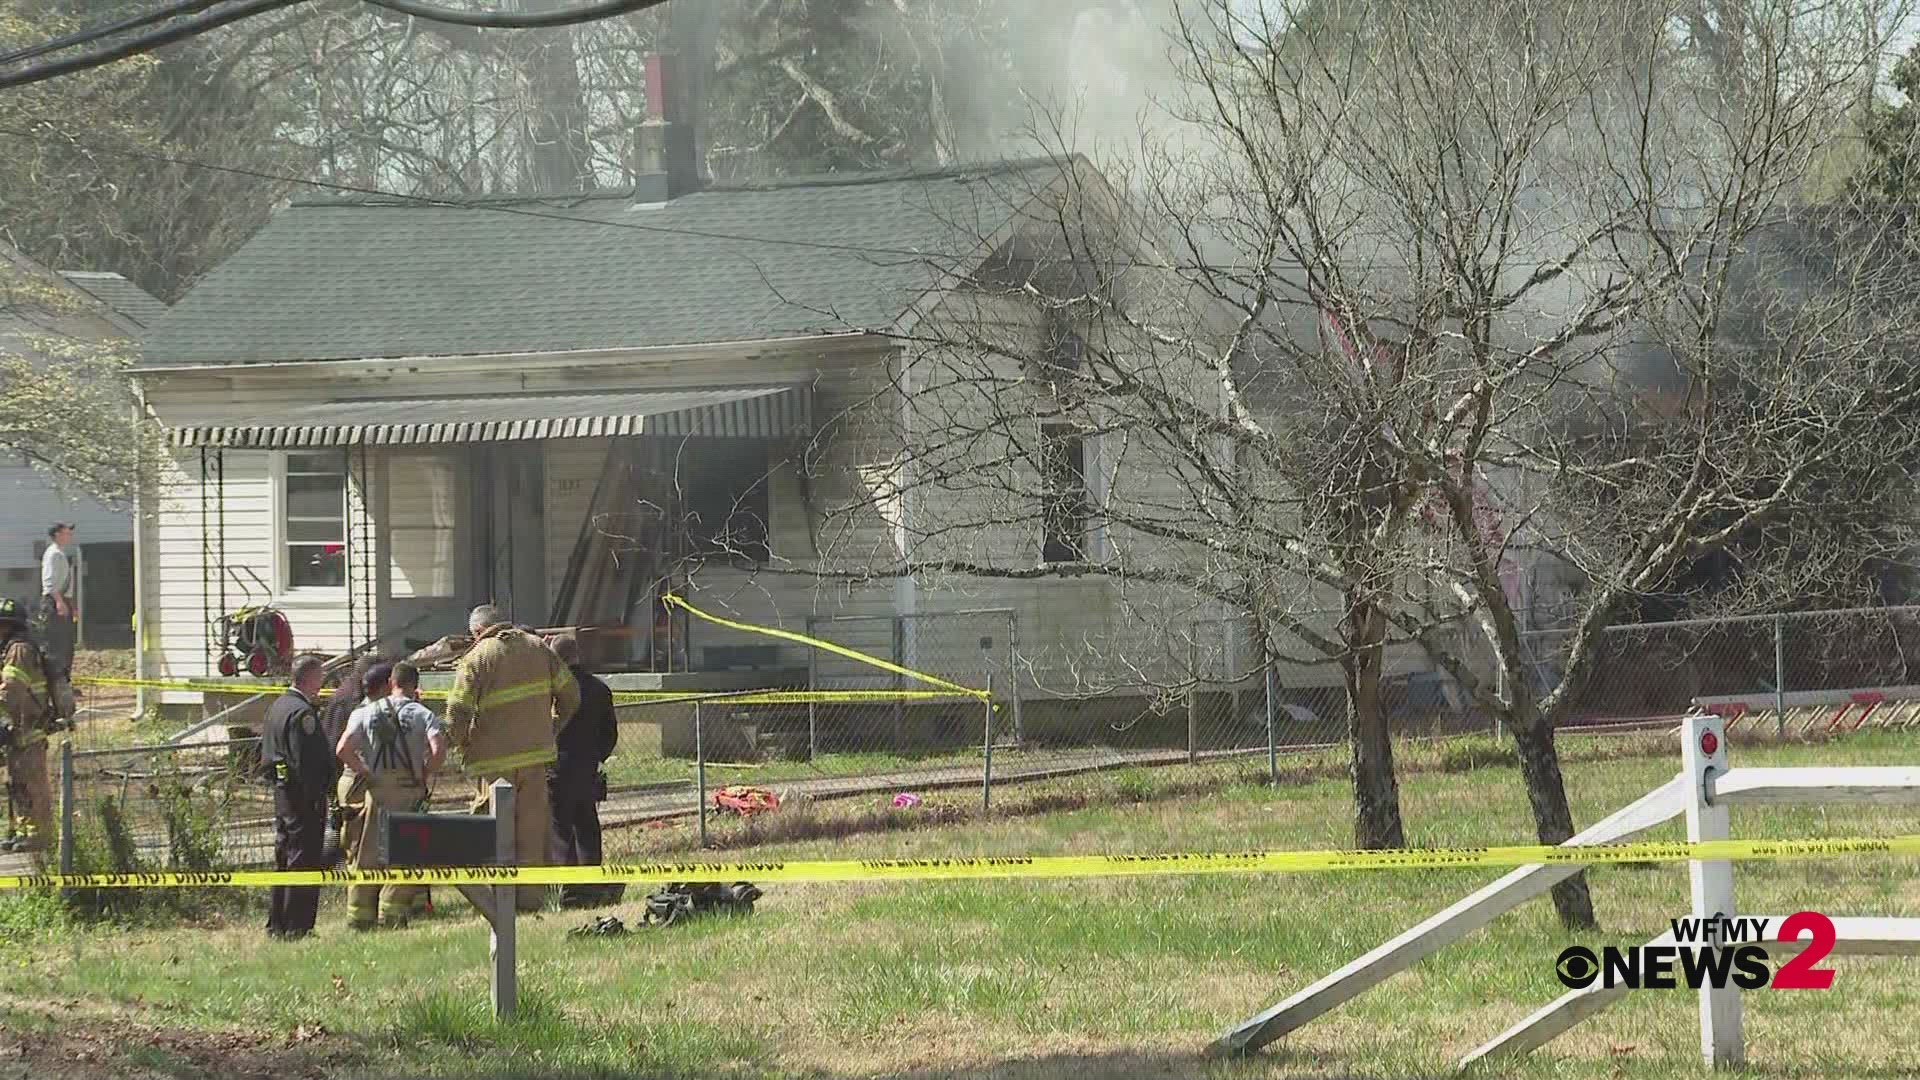 Greensboro fire crews said two children were inside the house during the fire.